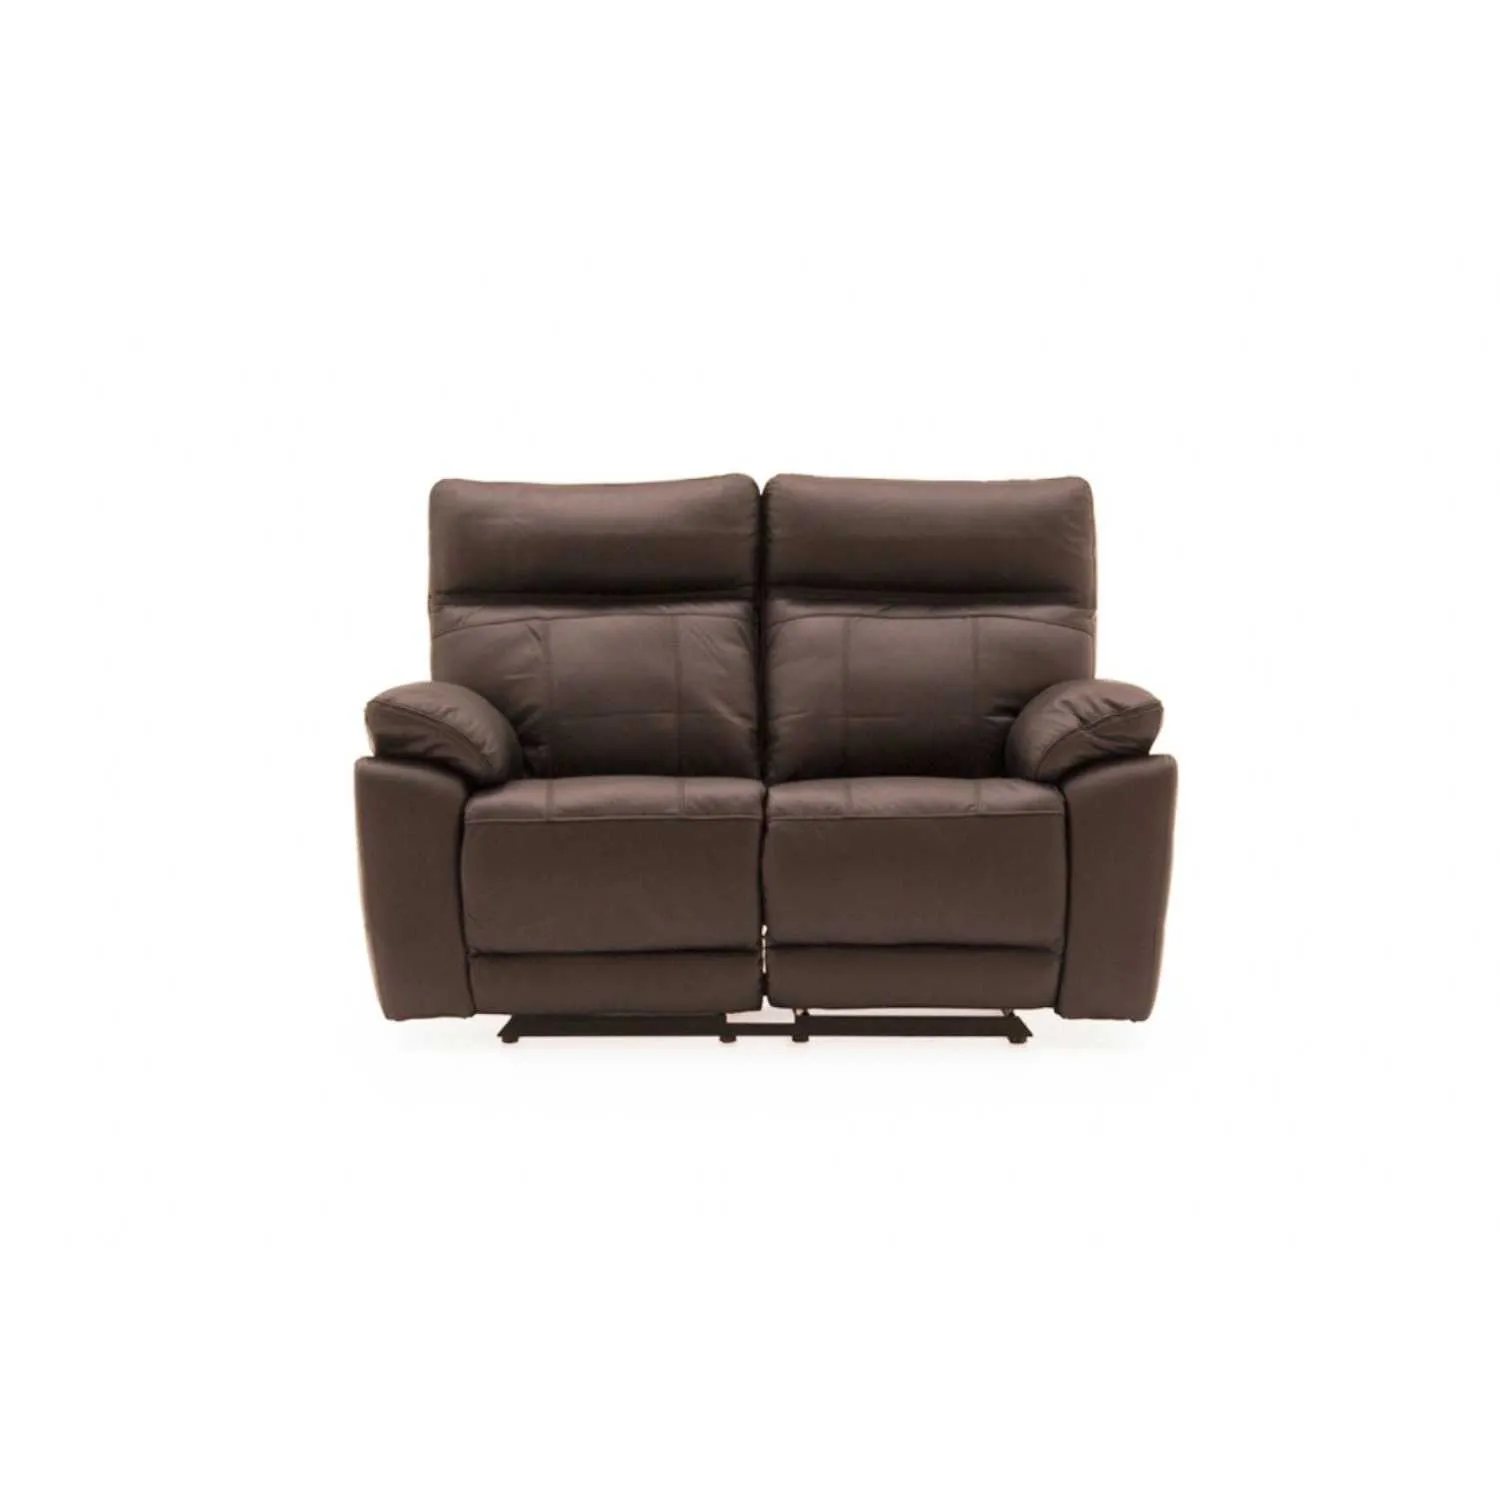 Positano 2 Seater Electric Recliner Brown